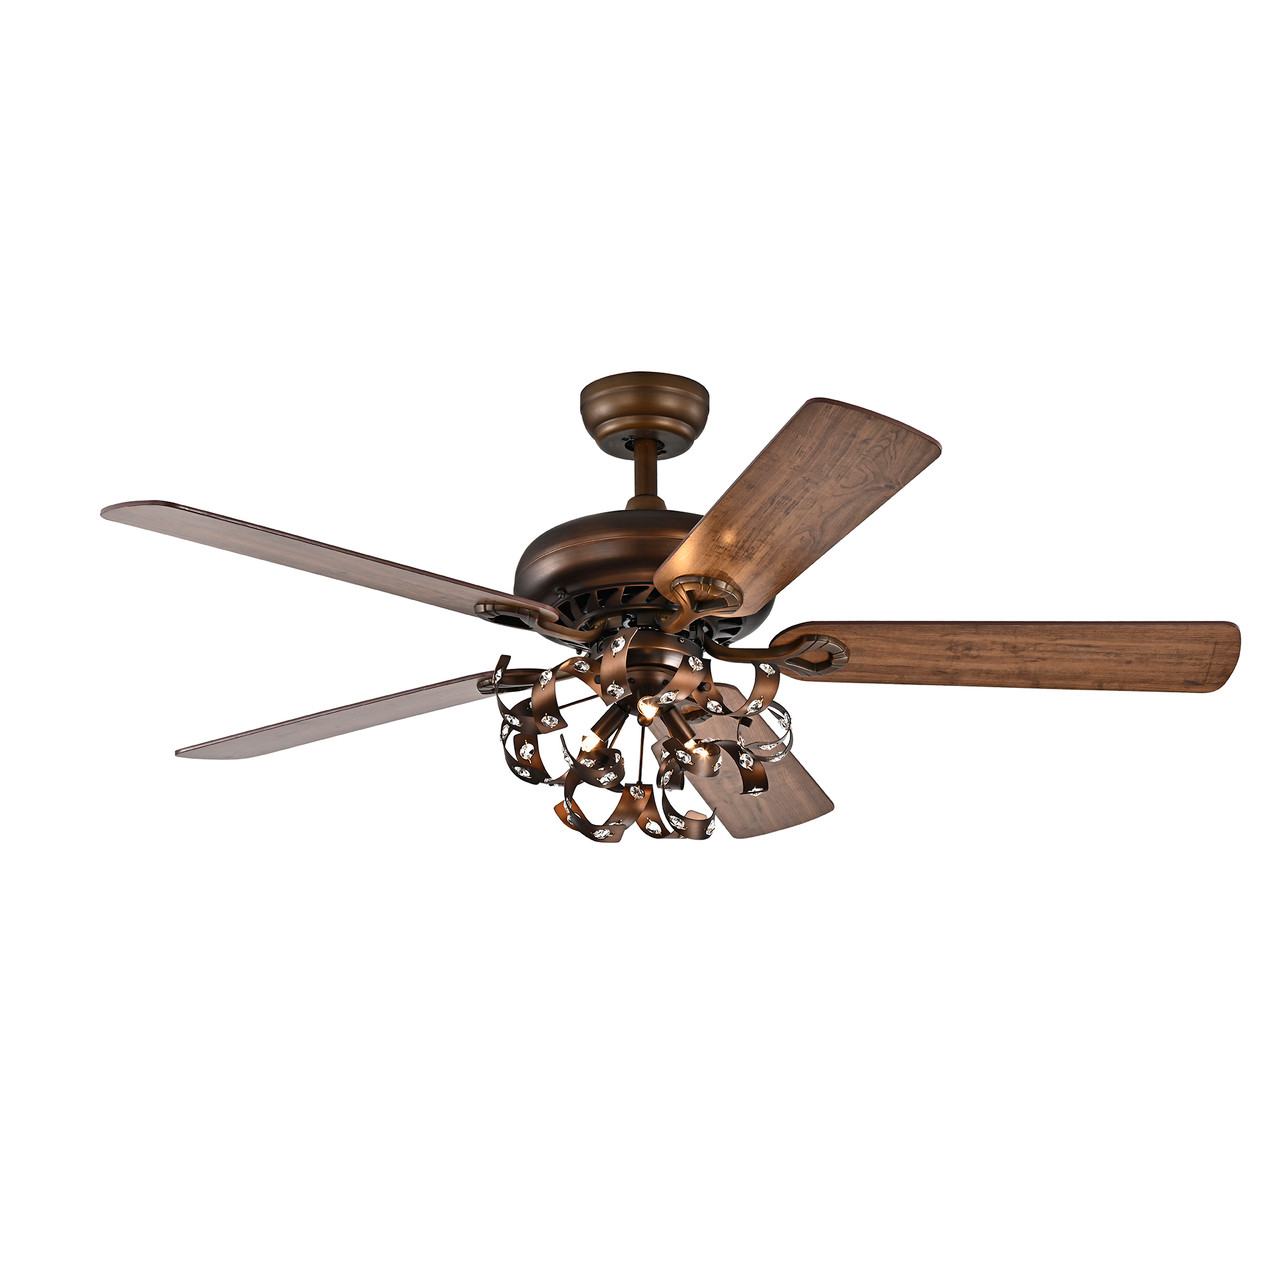 WAREHOUSE OF TIFFANY'S CFL-8446REMO/SB Paz 52 in. 3-Light Indoor Bronze Finish Remote Controlled Ceiling Fan with Light Kit